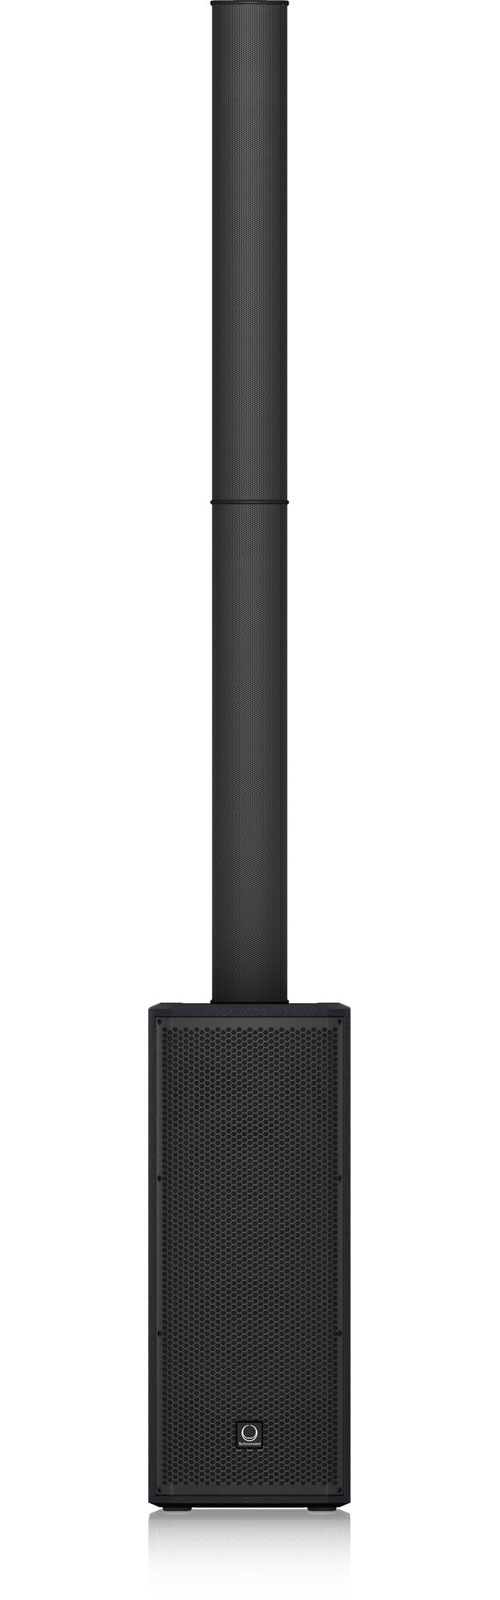 TURBOSOUND INSPIRE IP1000 V2 - SYSTME COLONNE (BLUETOOTH)